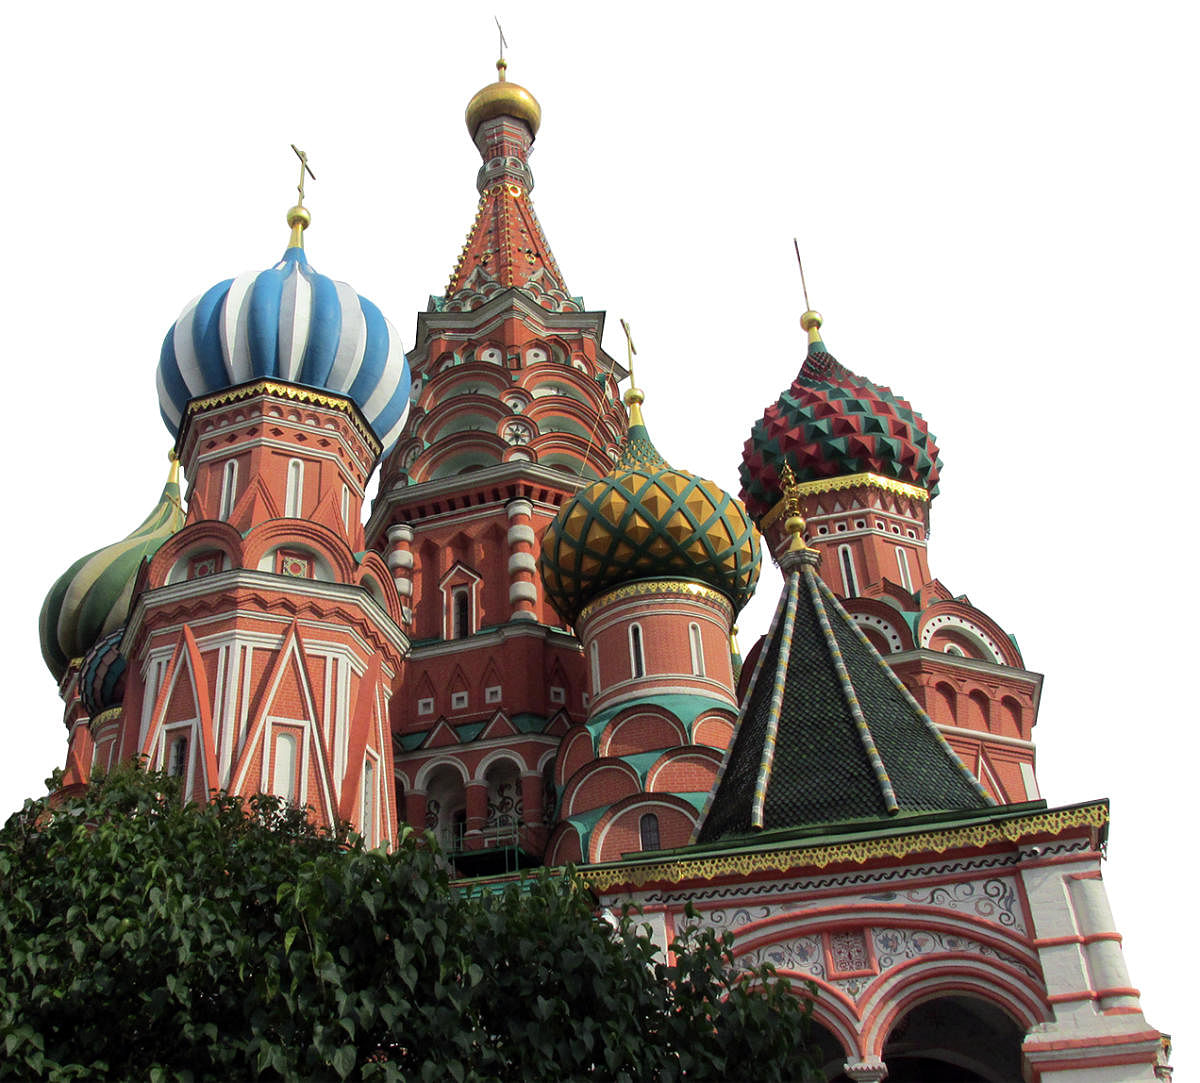 The onion domes of St Basil's Cathedral in Moscow, Russia.Photo by author